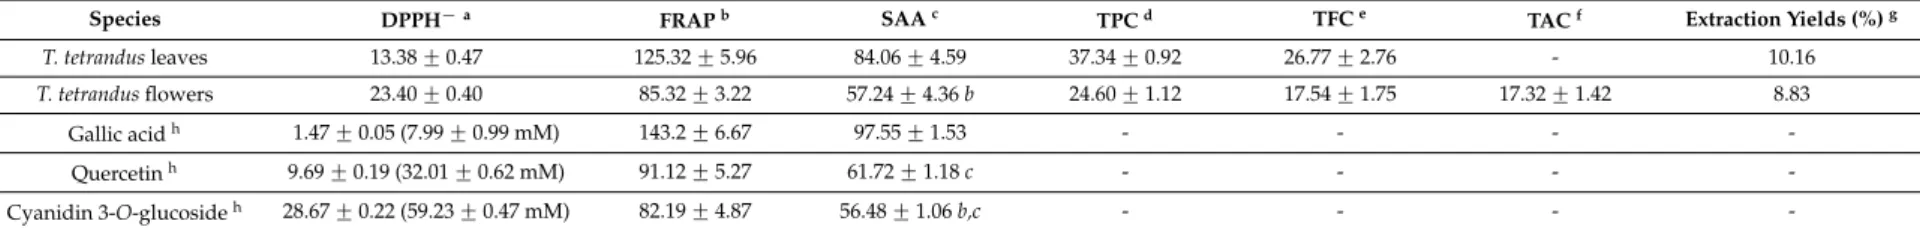 Table 1. Scavenging of the 1,1-diphenyl-2-picrylhydrazyl Radical (DPPH), Ferric Reducing Antioxidant Power (FRAP), Superoxide Anion scavenging activity (SAA), Total Phenolic Content (TPC), Total Flavonoid Content (TFC), Total Anthocyanin Content (TAC), and